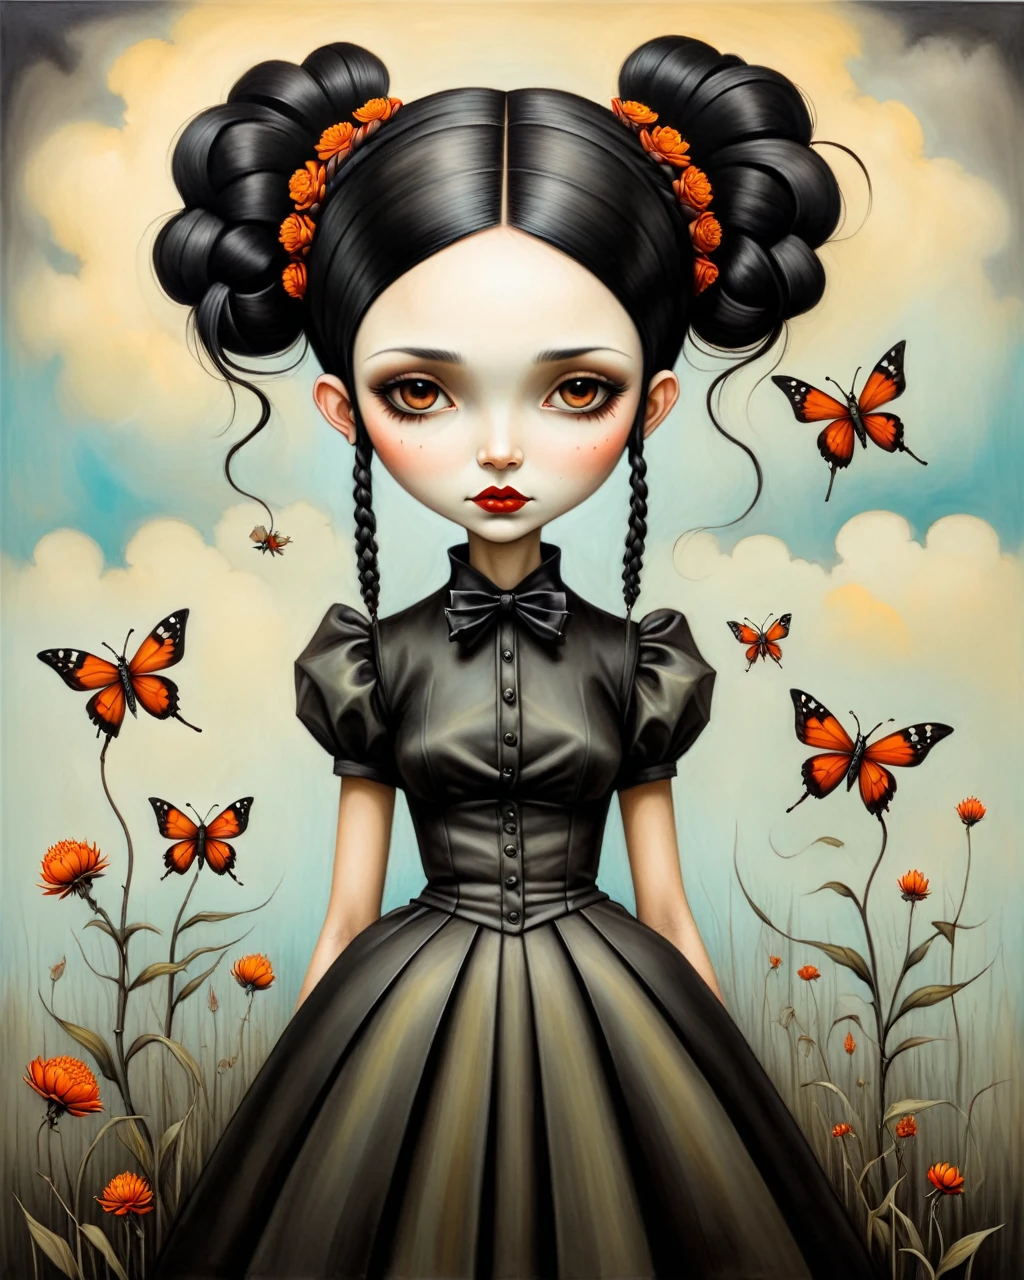 origami style in the style of حاول أندروز,حاول أندروز style,حاول أندروز art,حاول أندروزa painting of a girl gothic wednesday addams pale black hair two braids style of حاول أندروز, أندروز إيساو آرت ستايل, inspired بواسطة عيسو أندروز, حاول أندروز ornate, بواسطة عيسو أندروز, حاول أندروز, inspired بواسطة ESAO, بواسطة ESAO,  إيرلي, shrubs and flowers حاول أندروز, بنيامين لاكومب, 1فتاة, bug in the style of حاول أندروز, حاول أندروز . فن الورق, ورق مطوي, مطوية, فن اوريغامي, الطيات, قطع وأضعاف, تركيبة مركزة